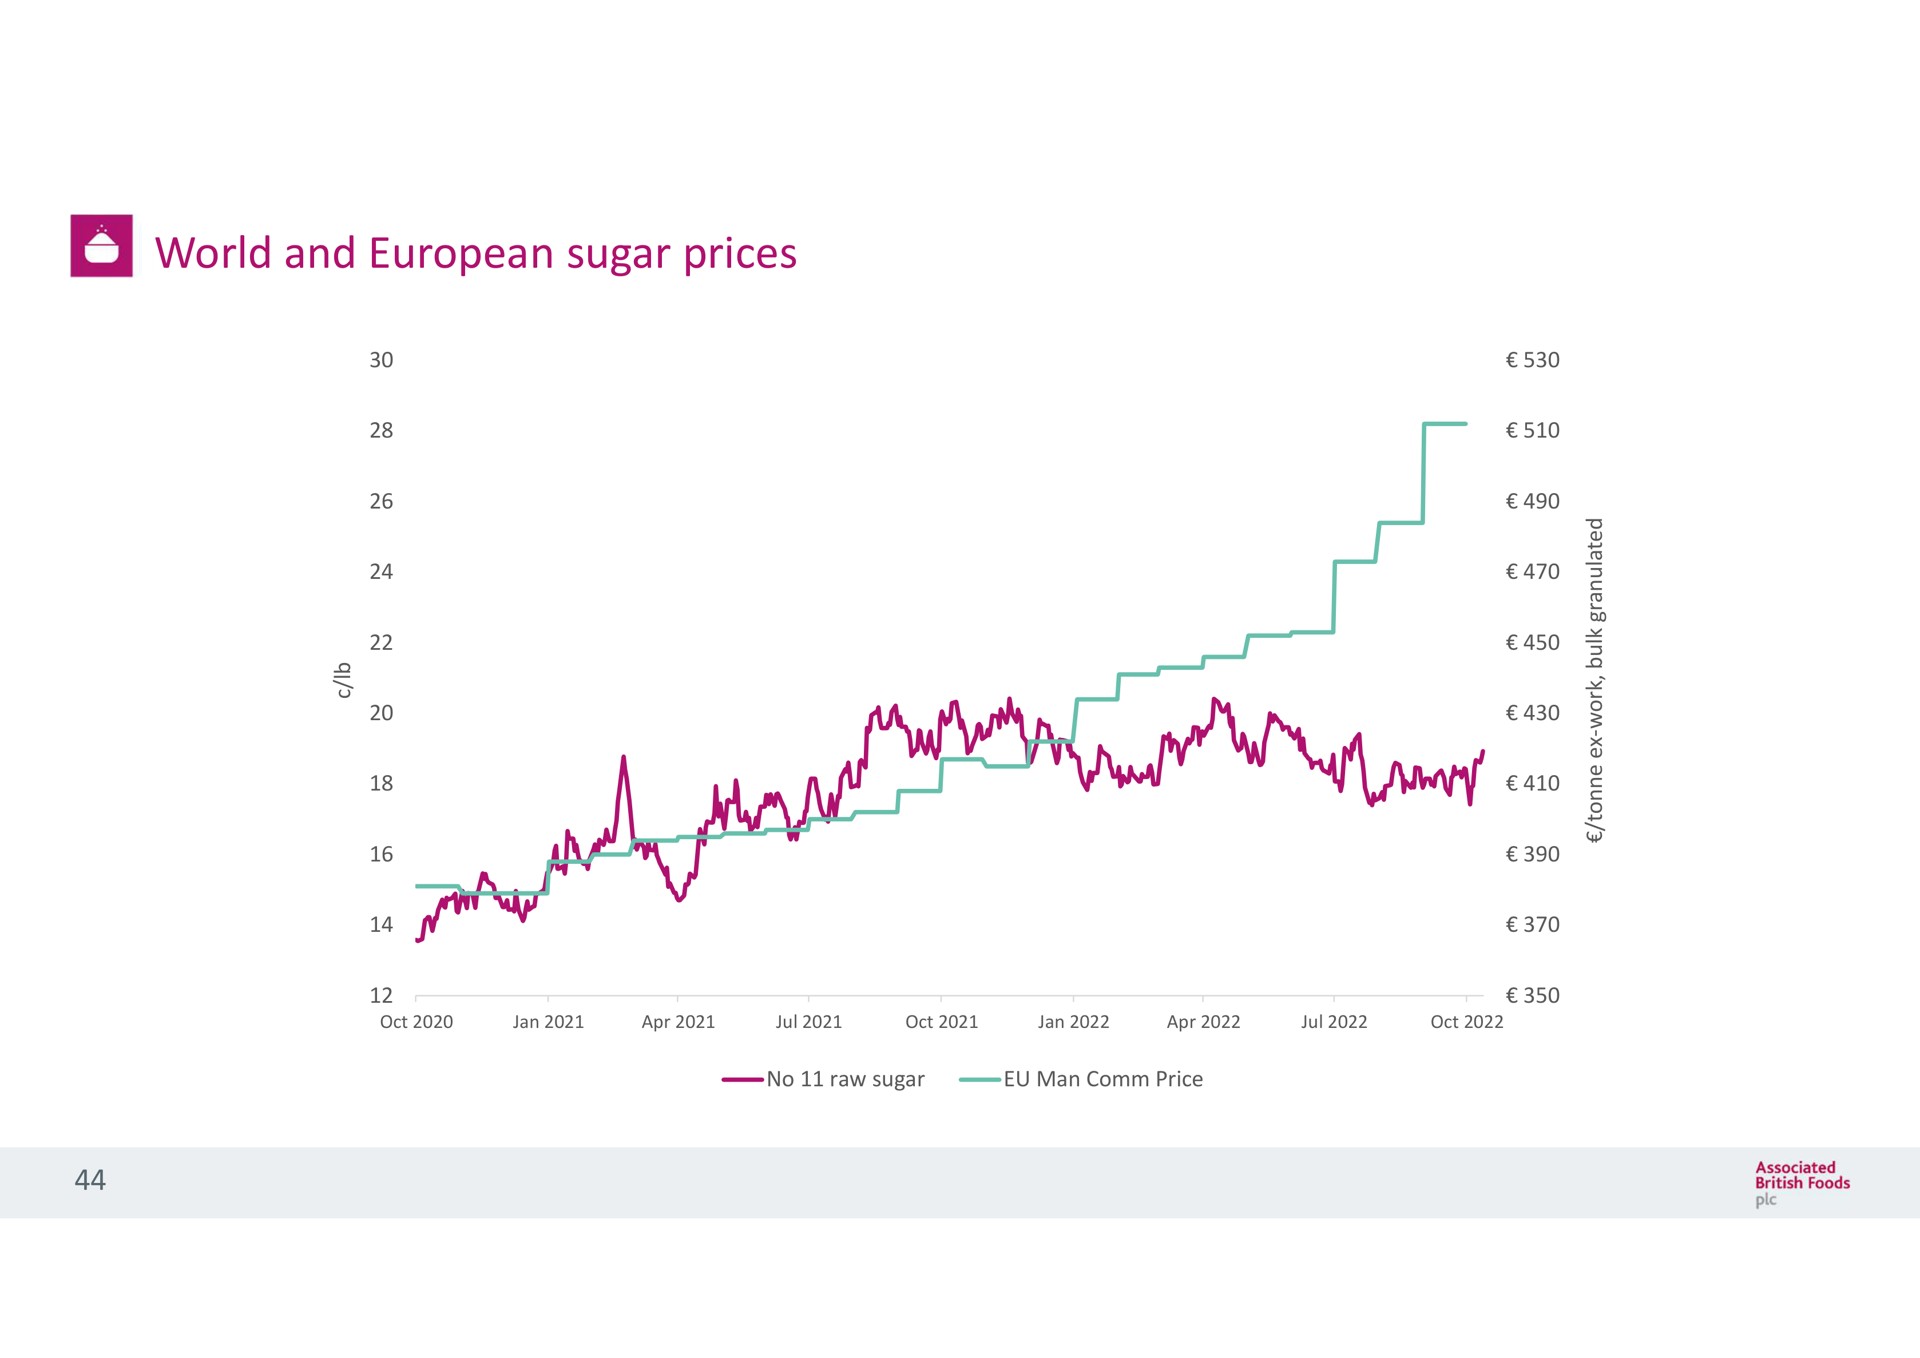 world and sugar prices | Associated British Foods